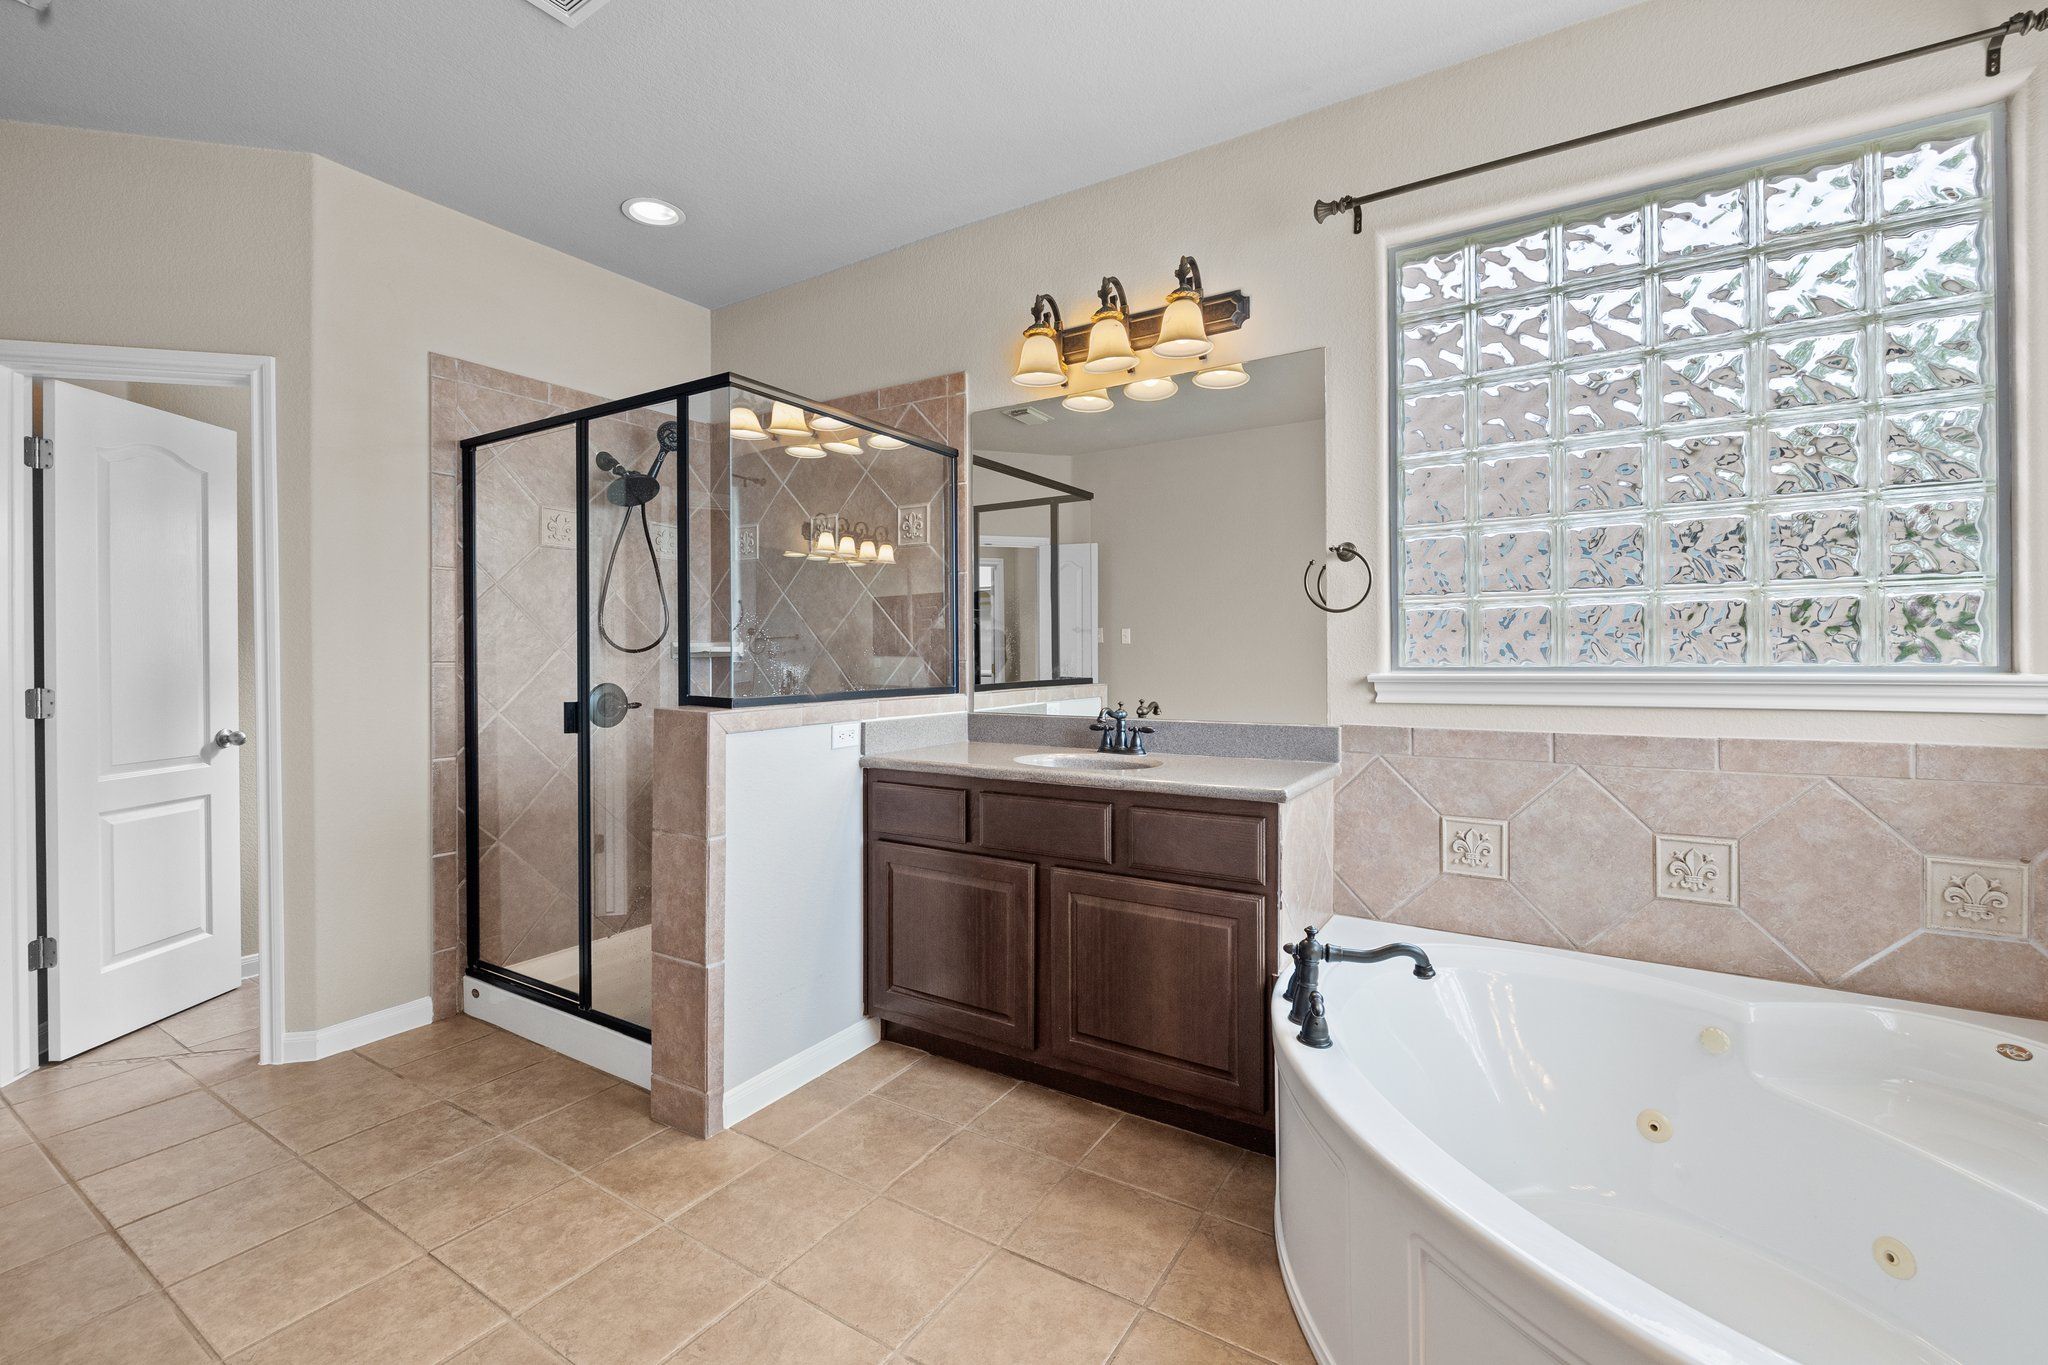 Lovely master bathroom with two sinks, large walk-in shower, jetted tub